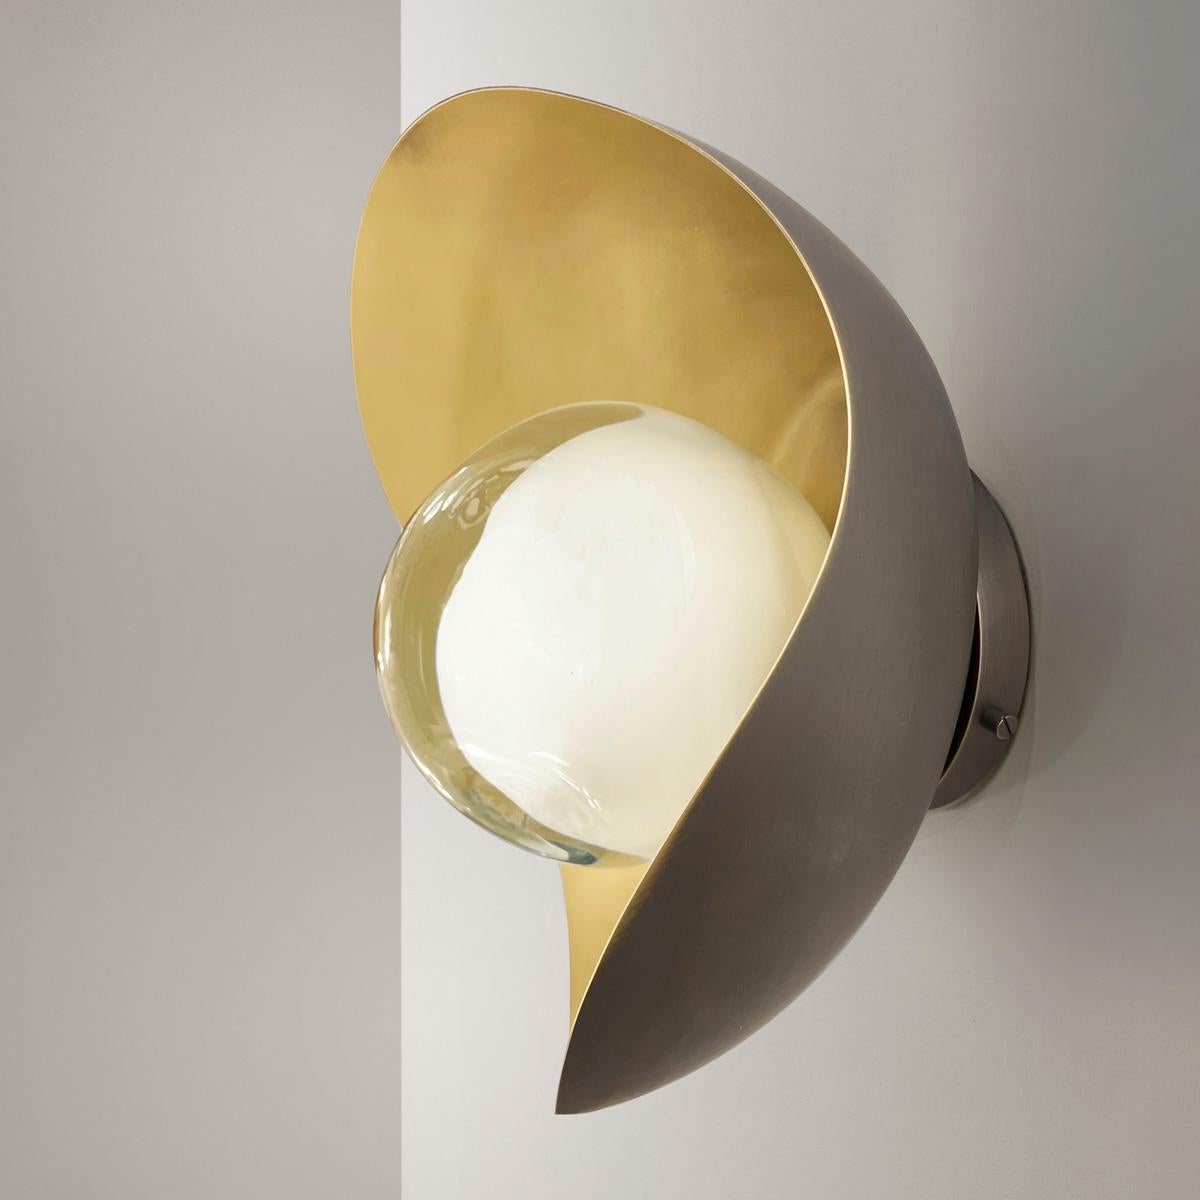 Perla Wall Light by Gaspare Asaro-Polished Copper and Sand White Finish For Sale 2